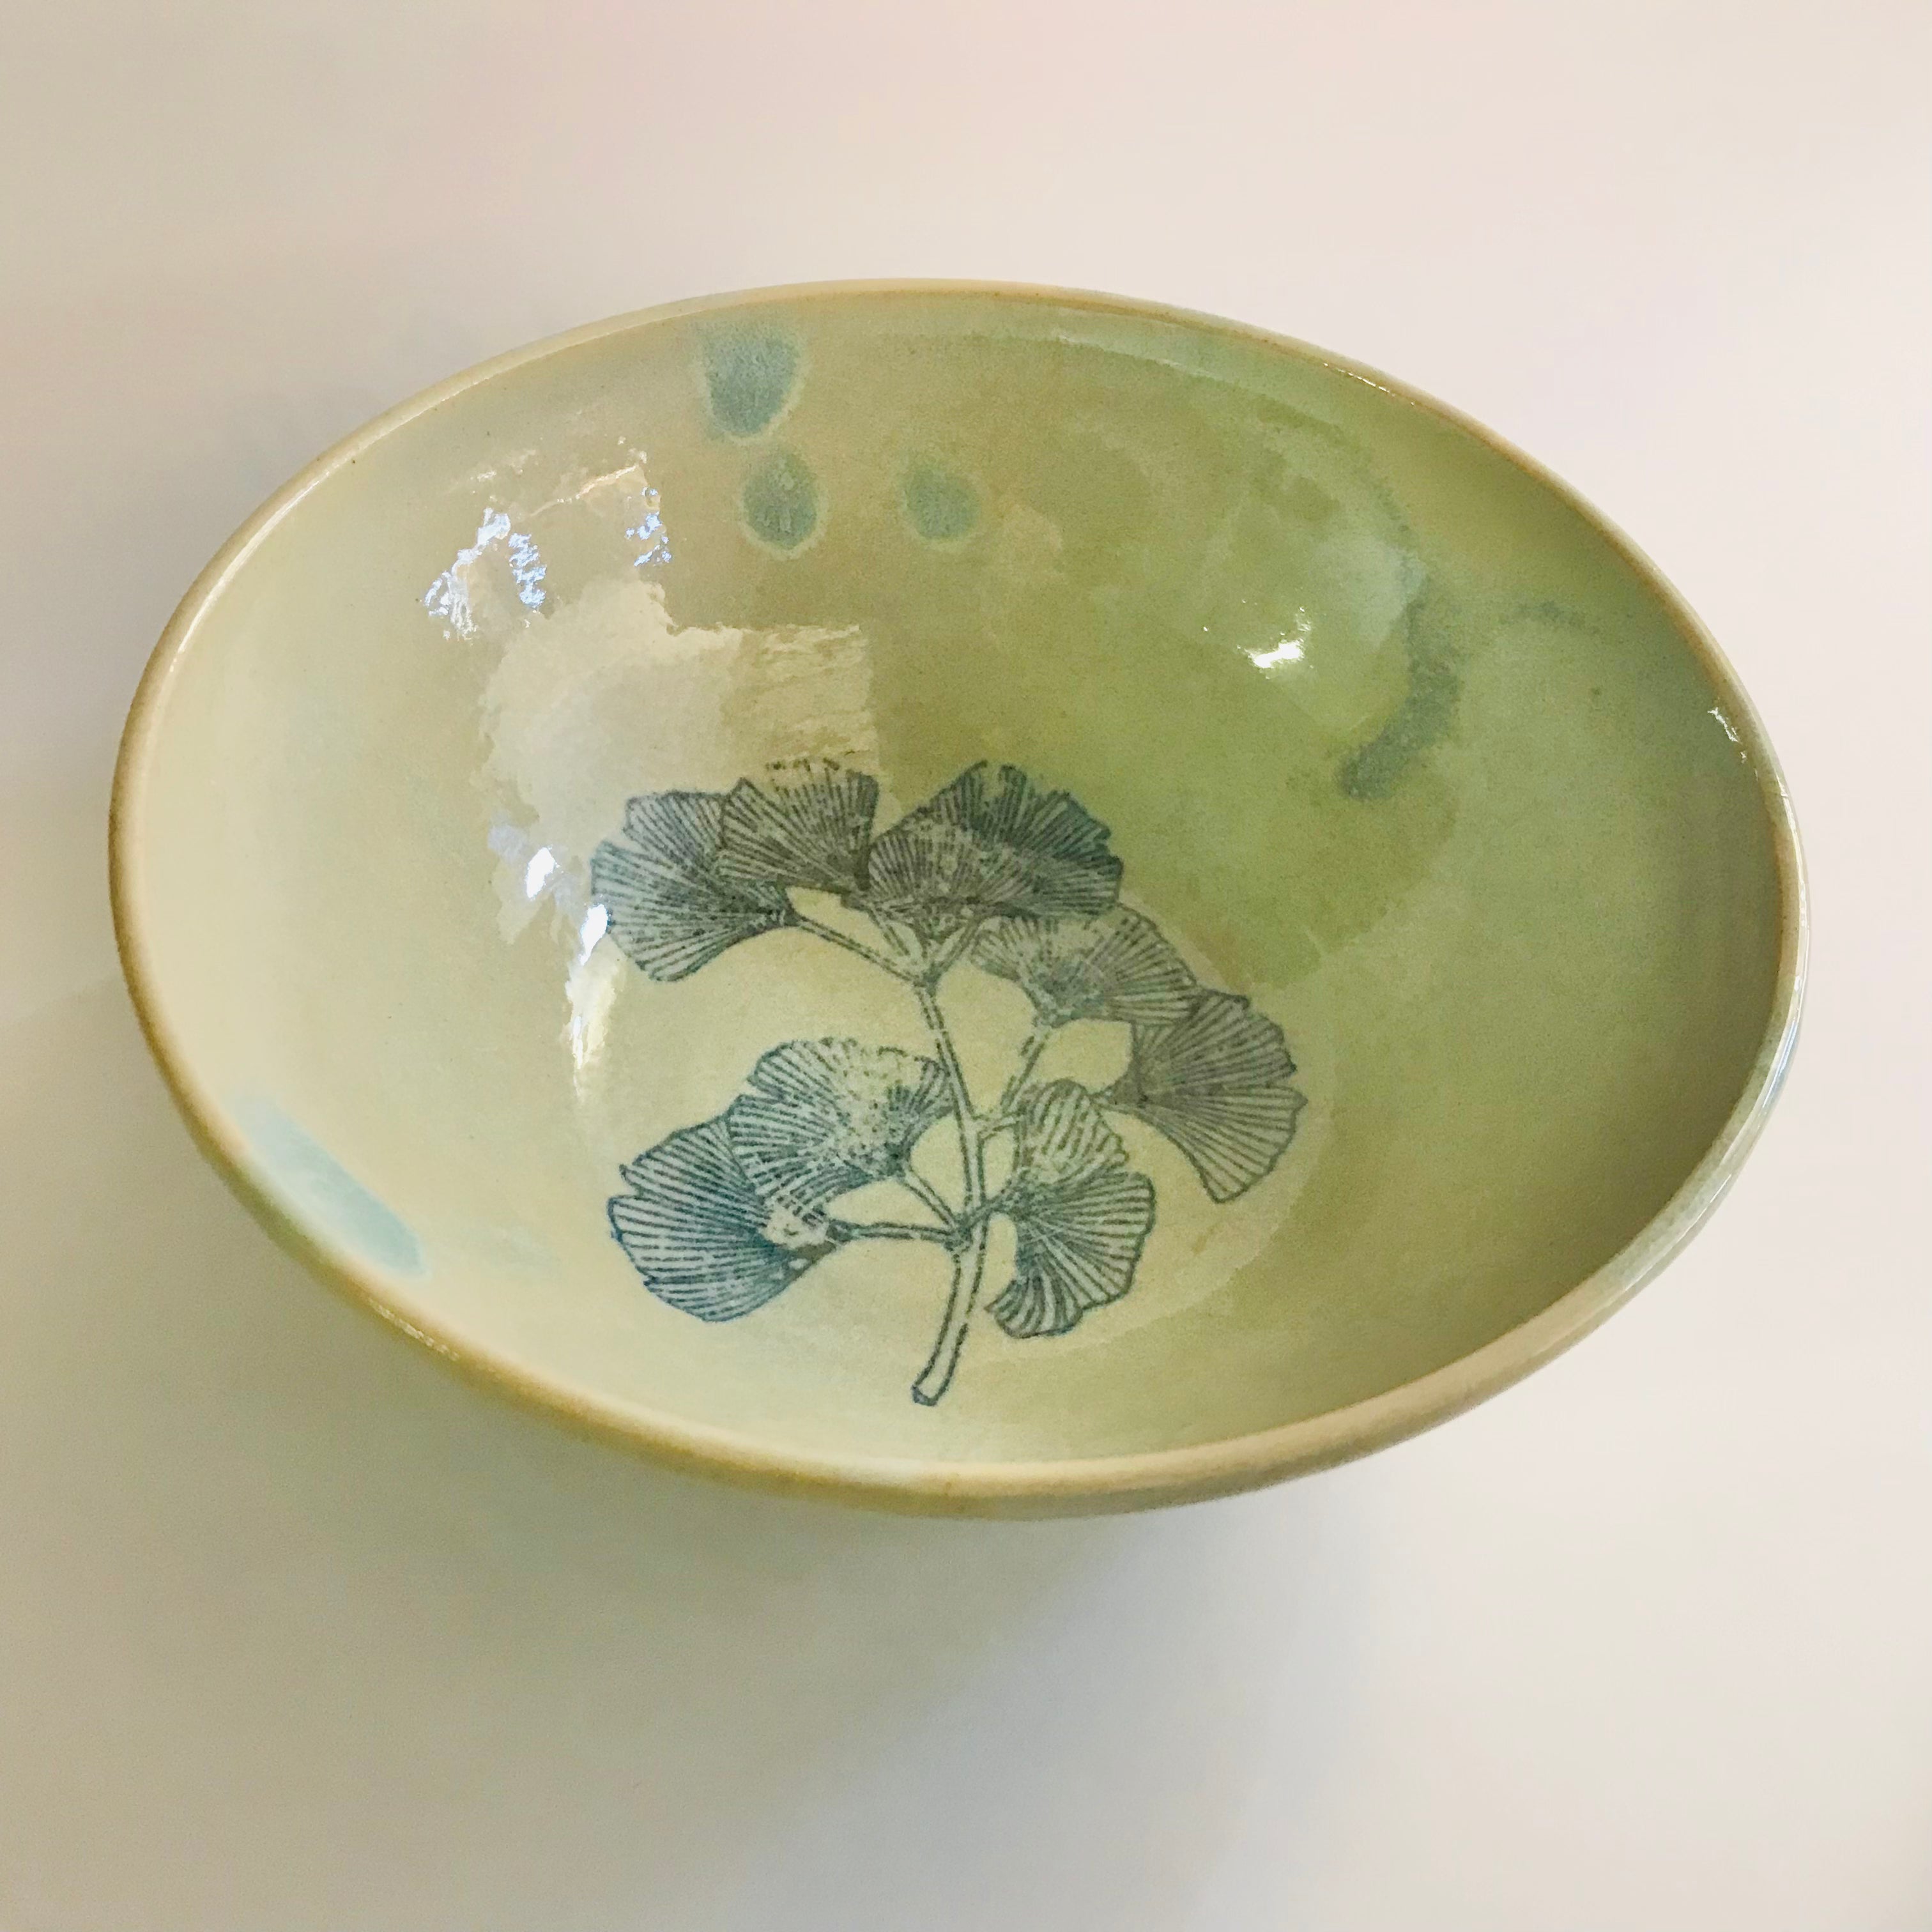 Handthrown Pottery Bowls